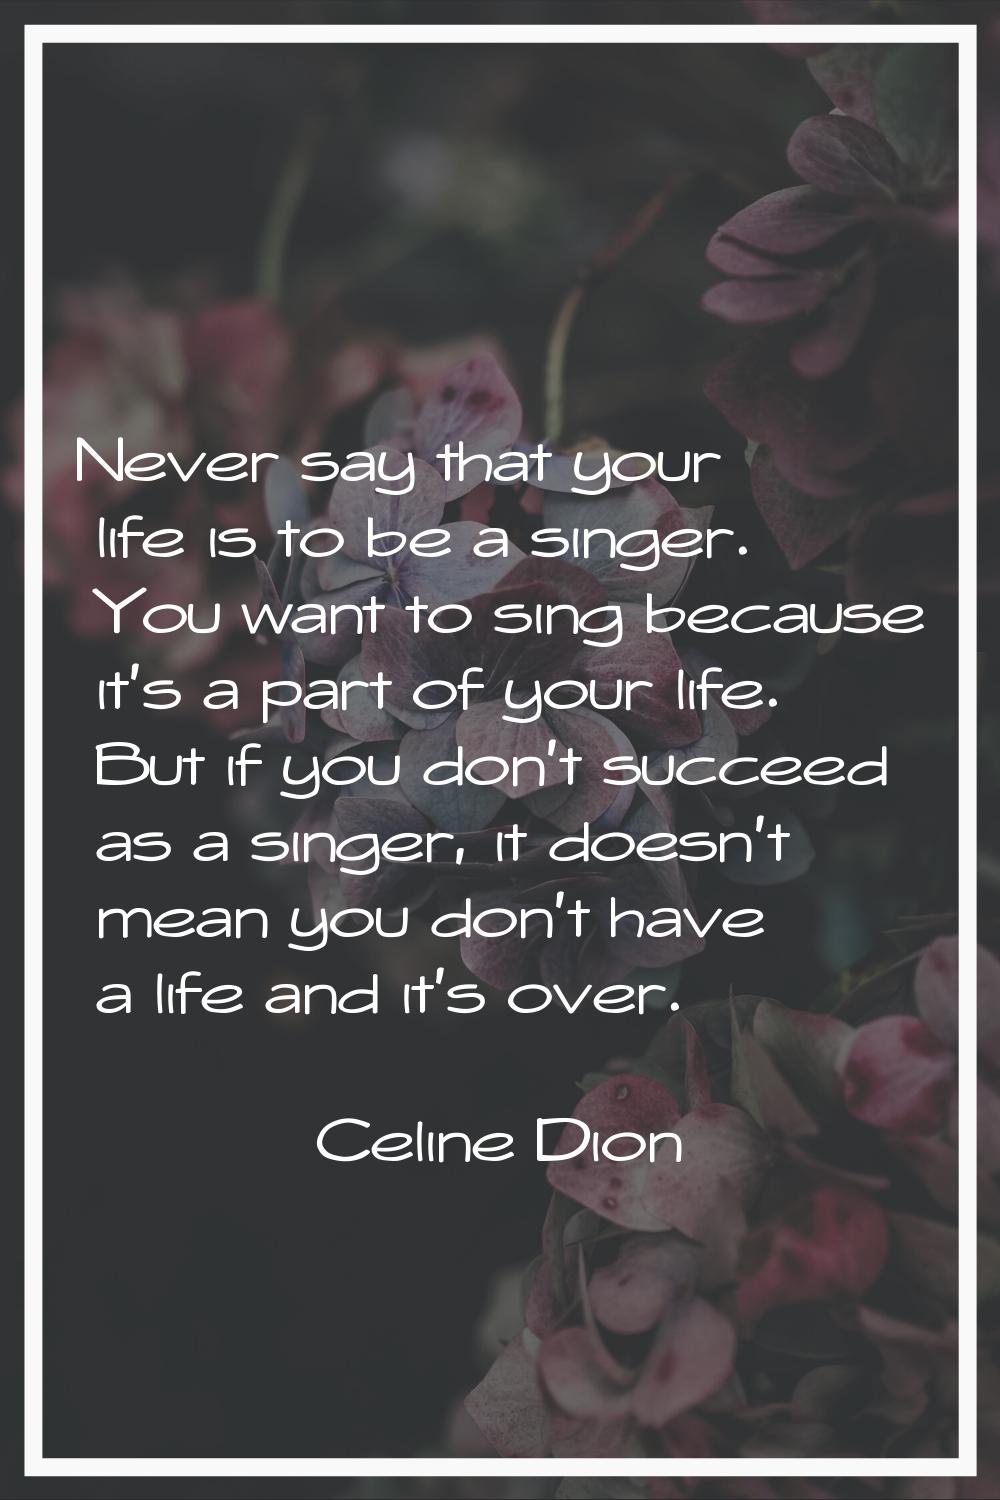 Never say that your life is to be a singer. You want to sing because it's a part of your life. But 